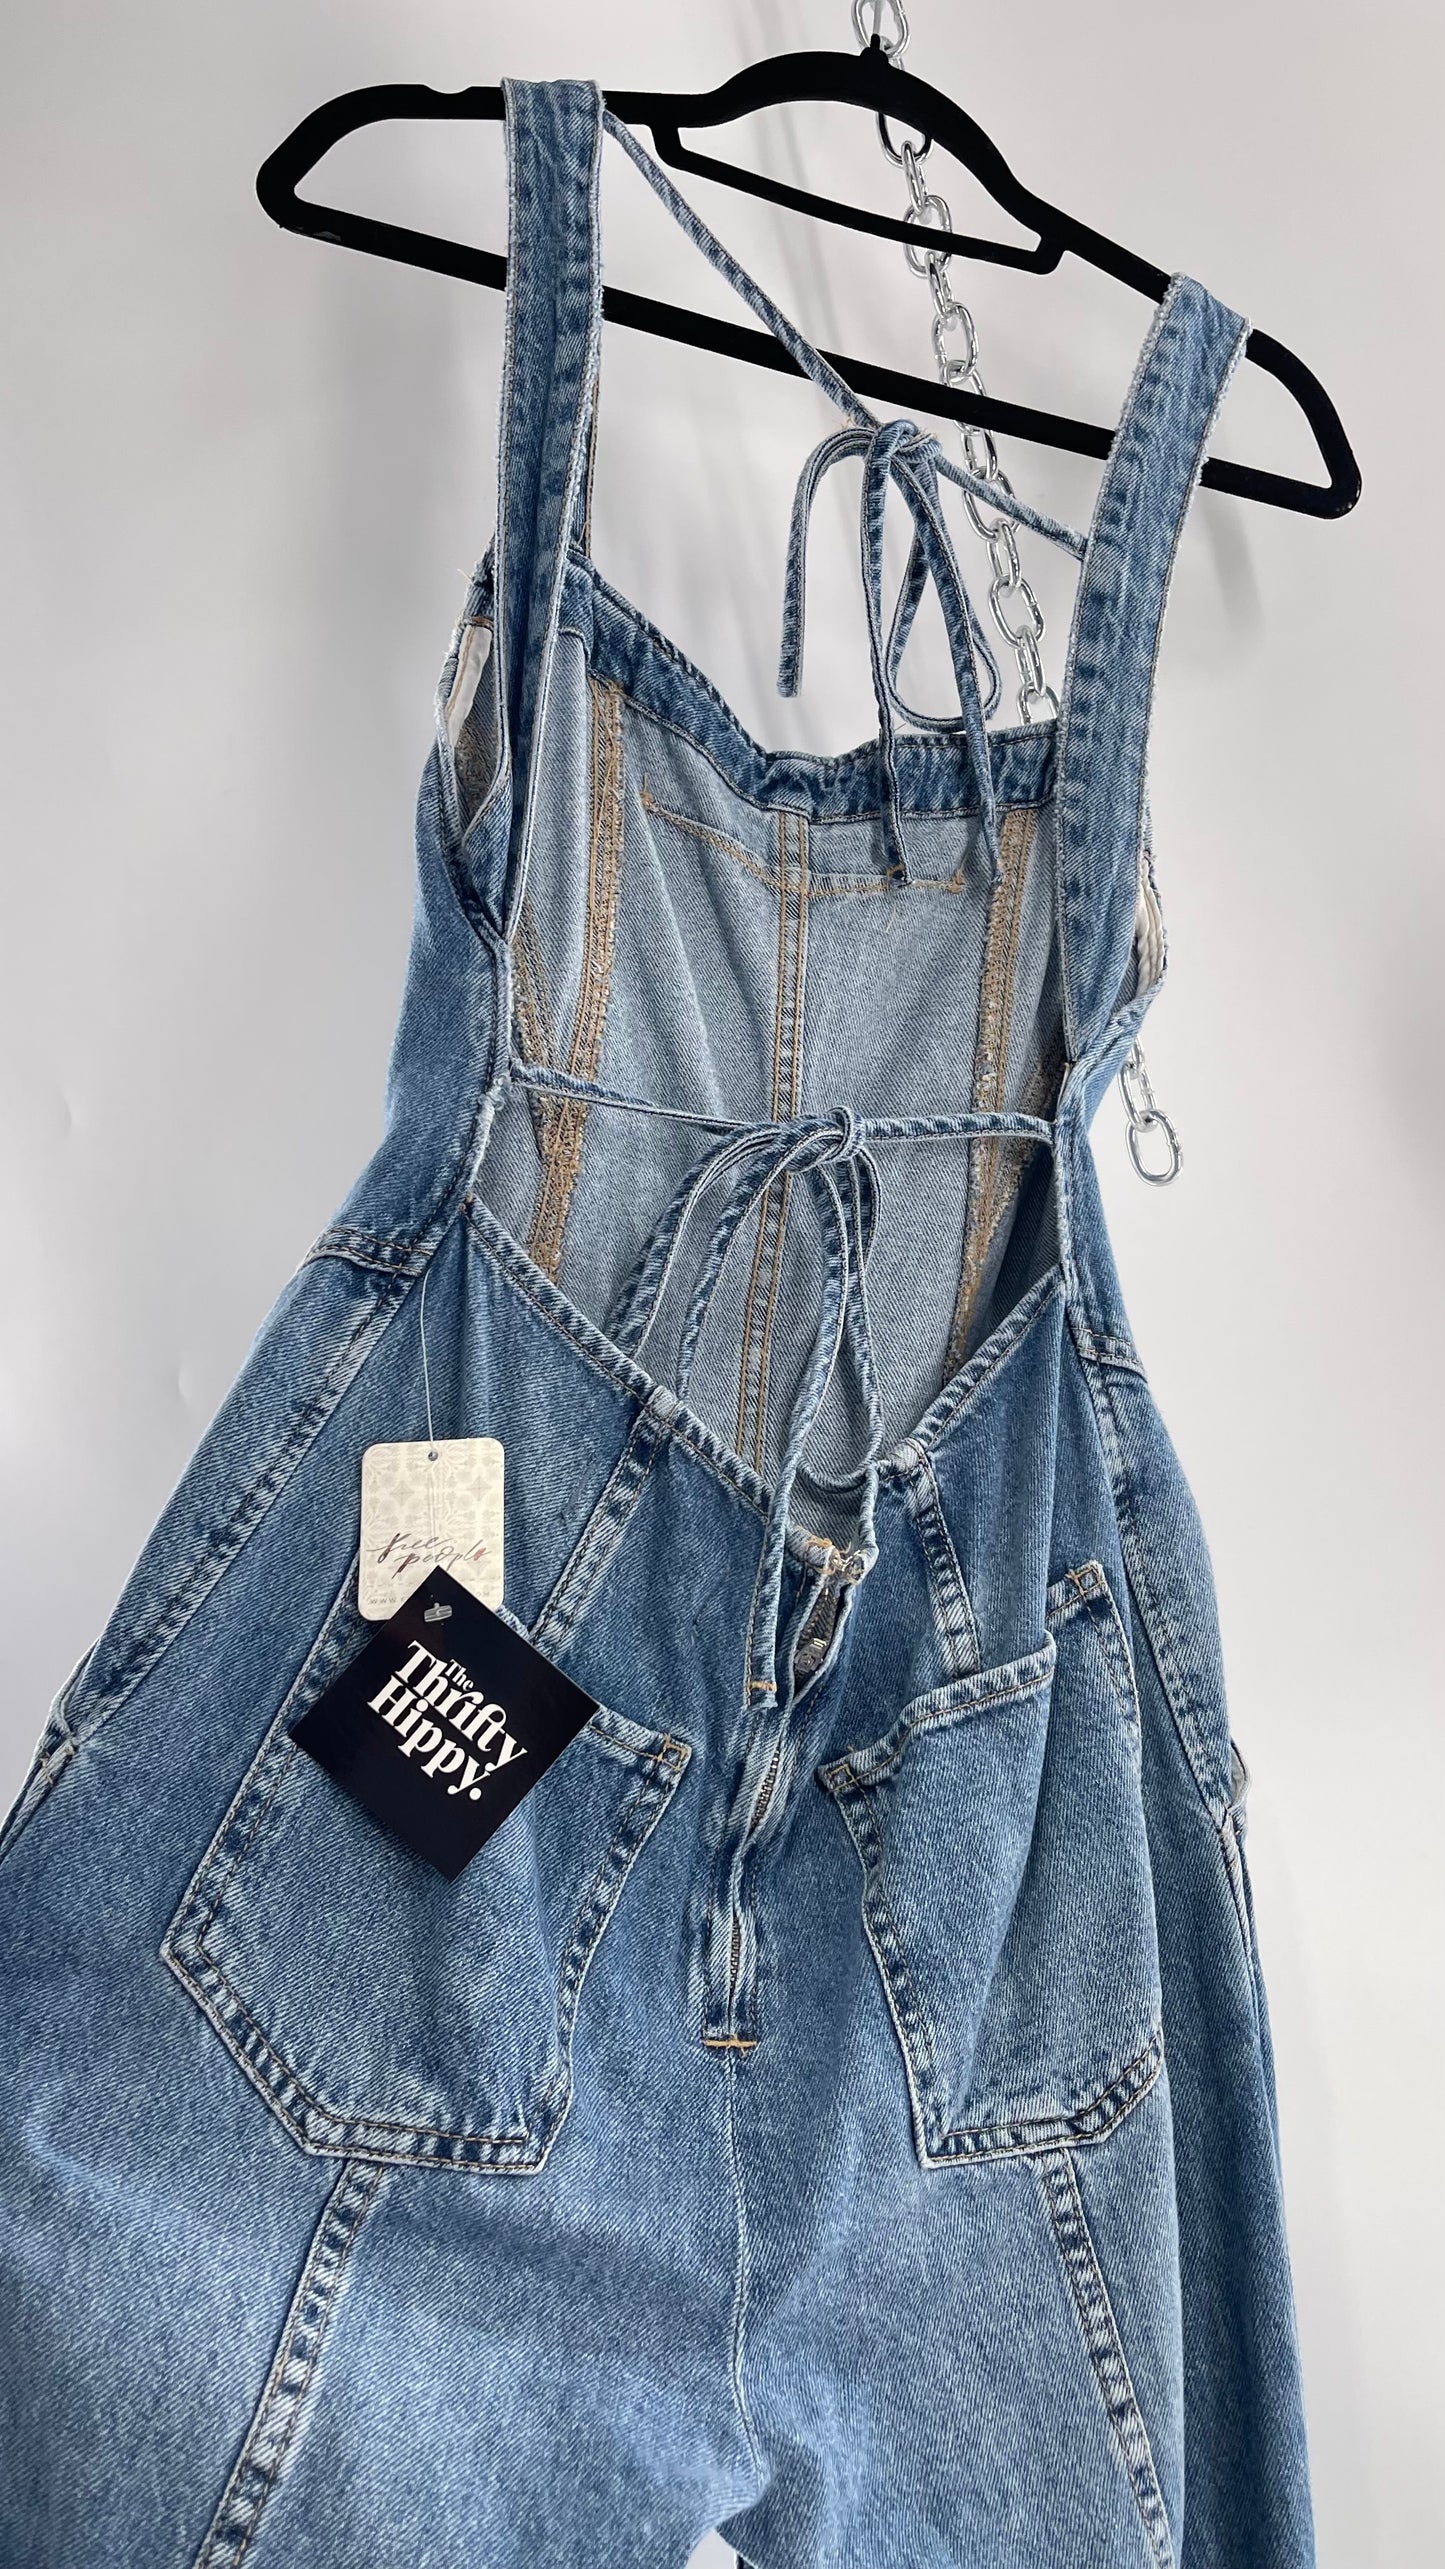 Free People Denim Backless Wide Leg Jumpsuit with Tags Attached (Small)